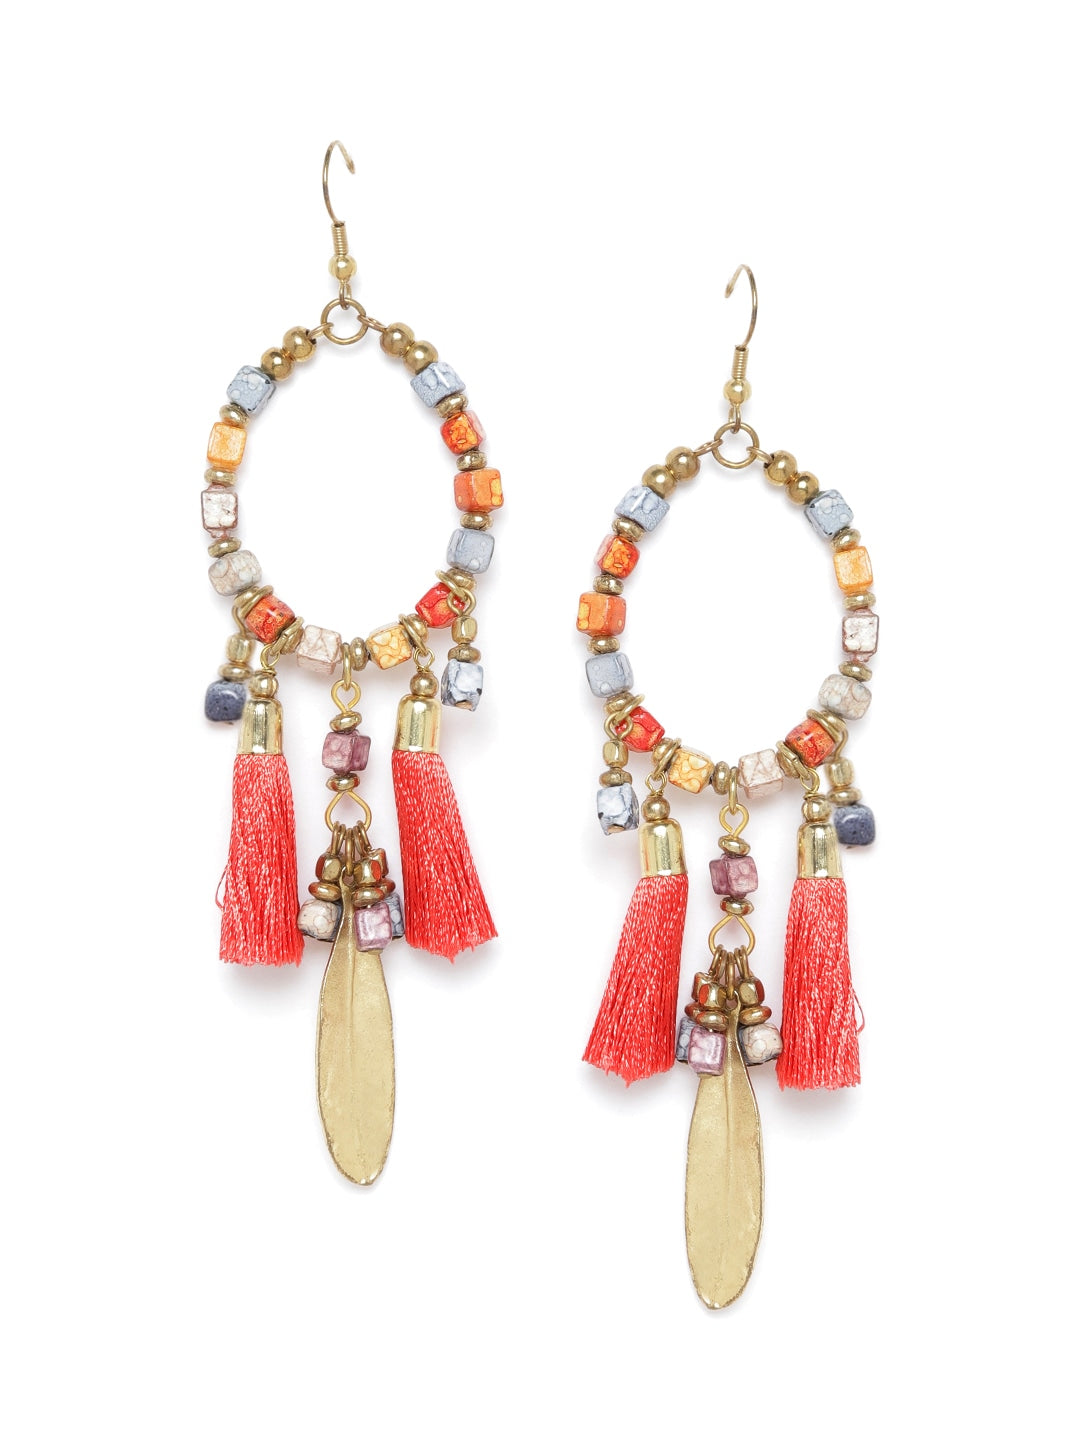 Coral Red & Blue Gold-Plated Beaded Tasselled Oval Drop Earrings